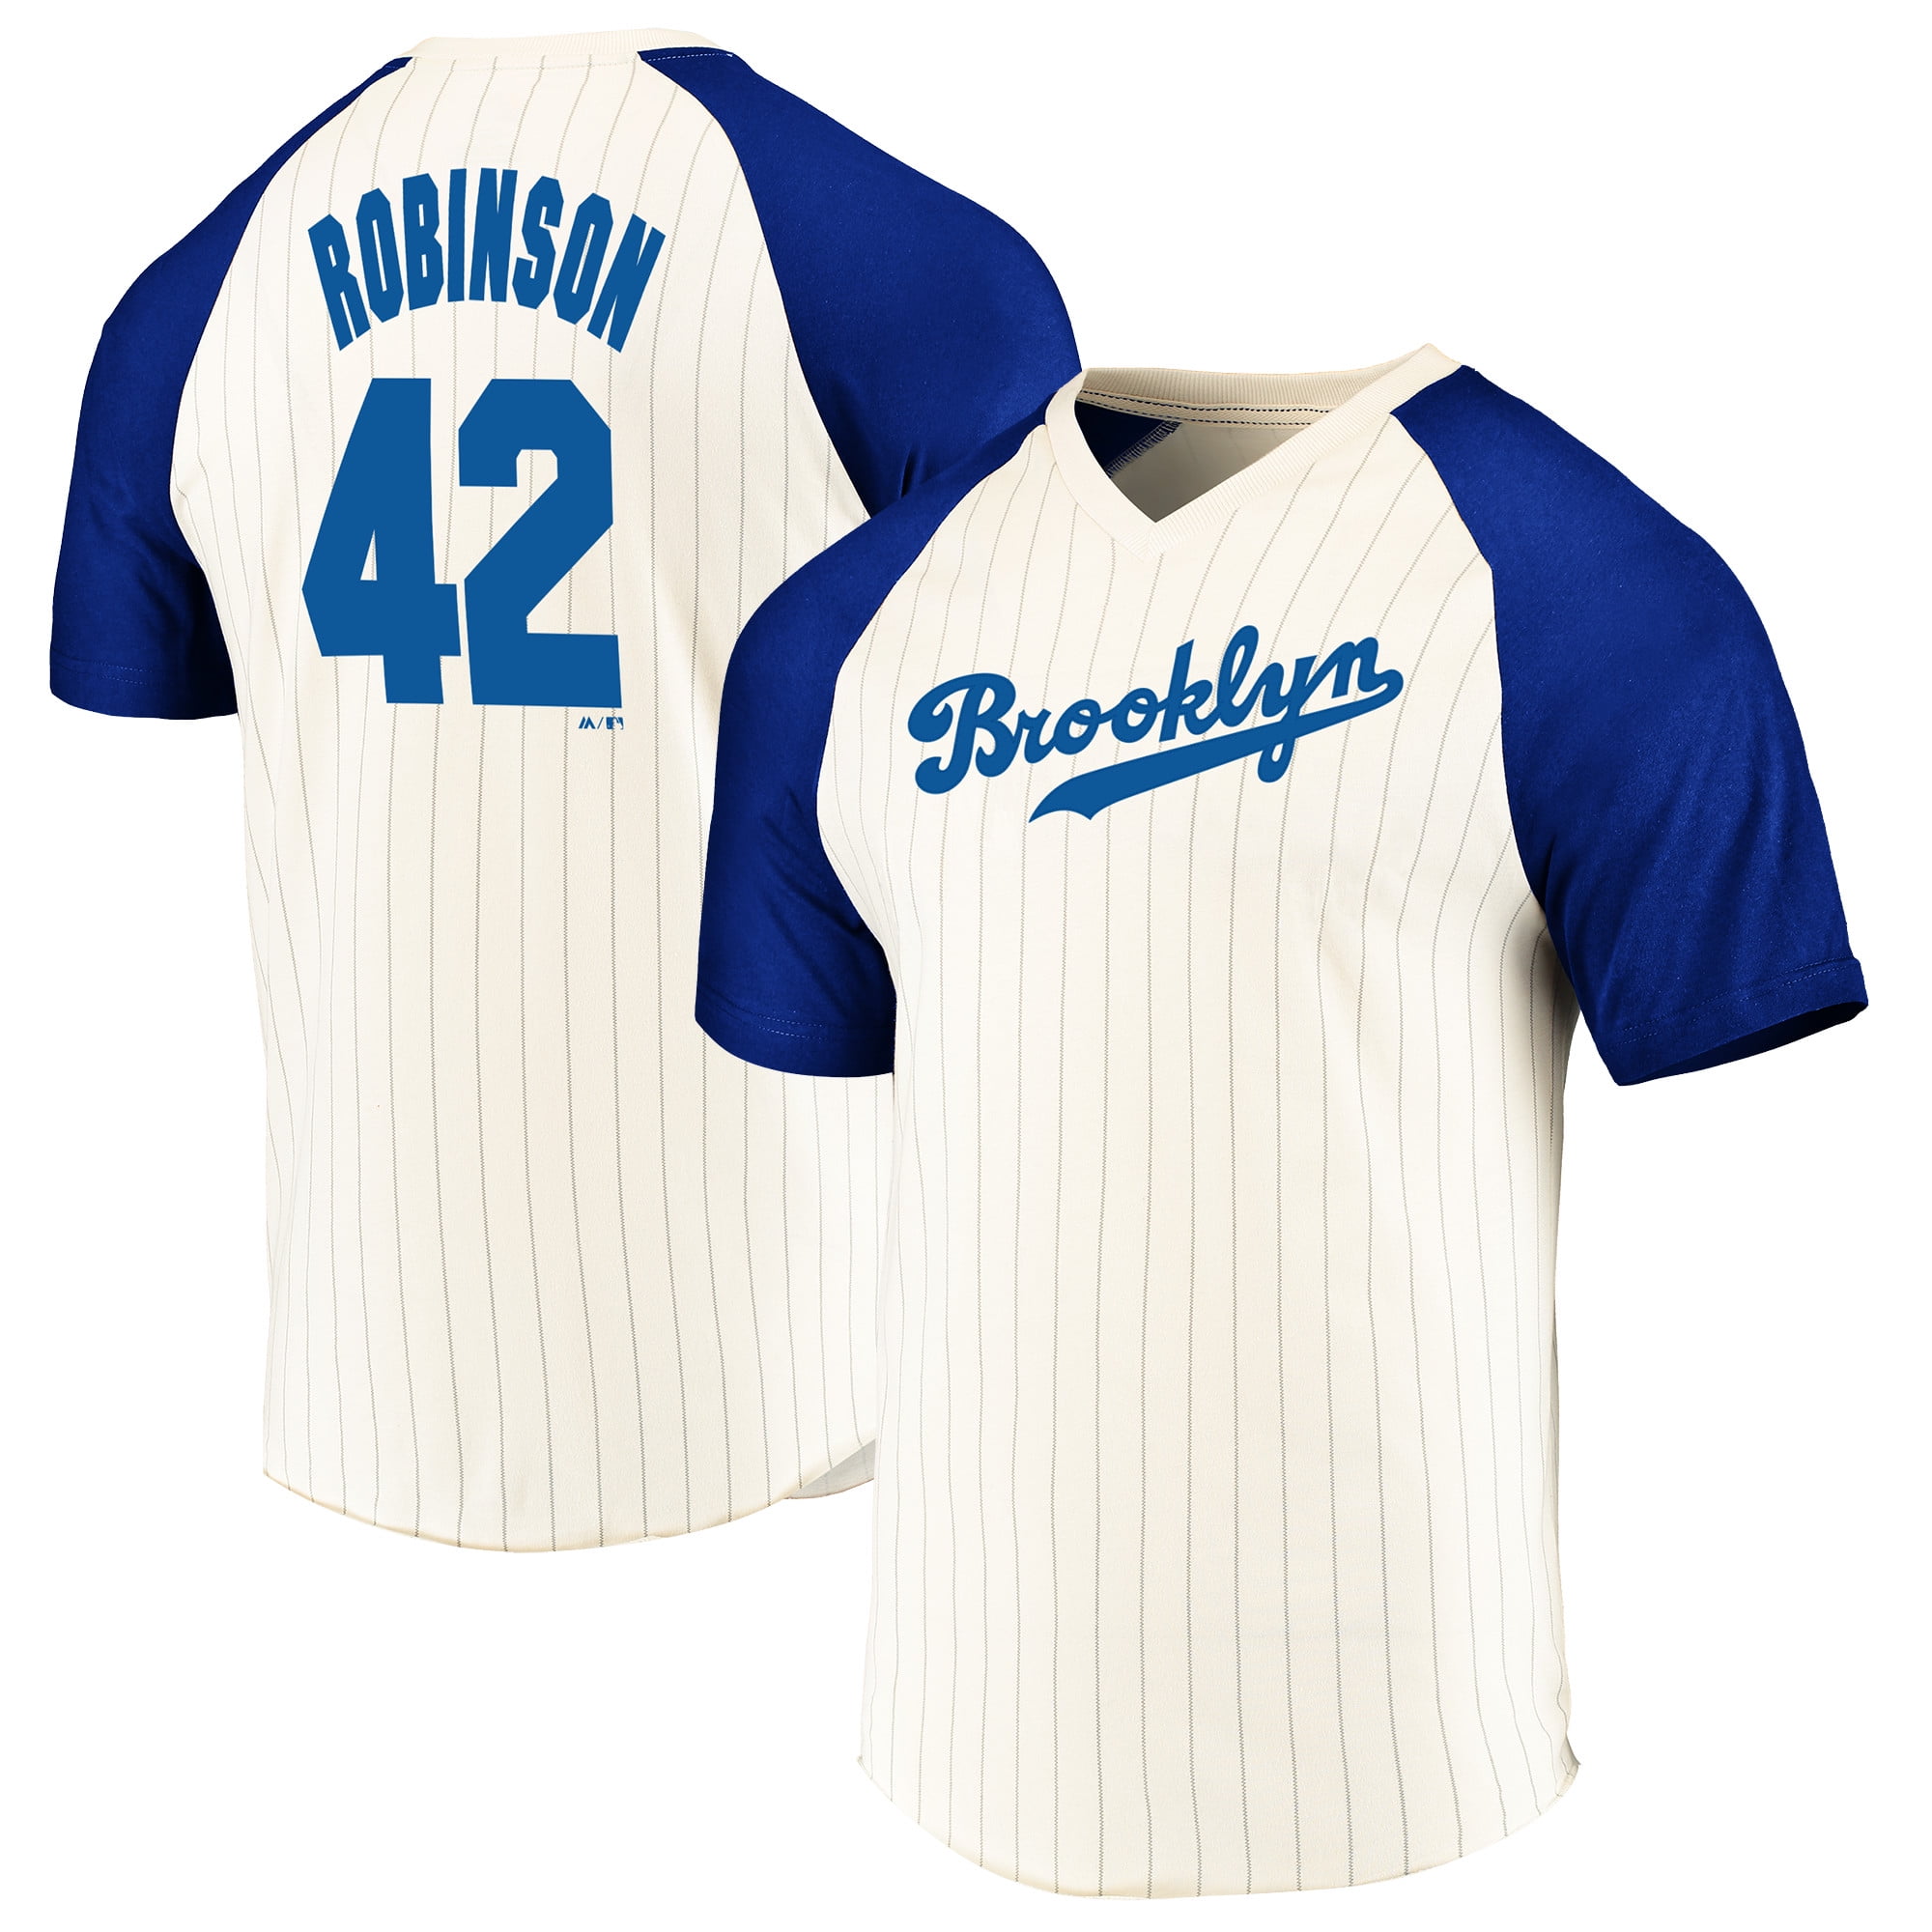 what was jackie robinson's jersey number